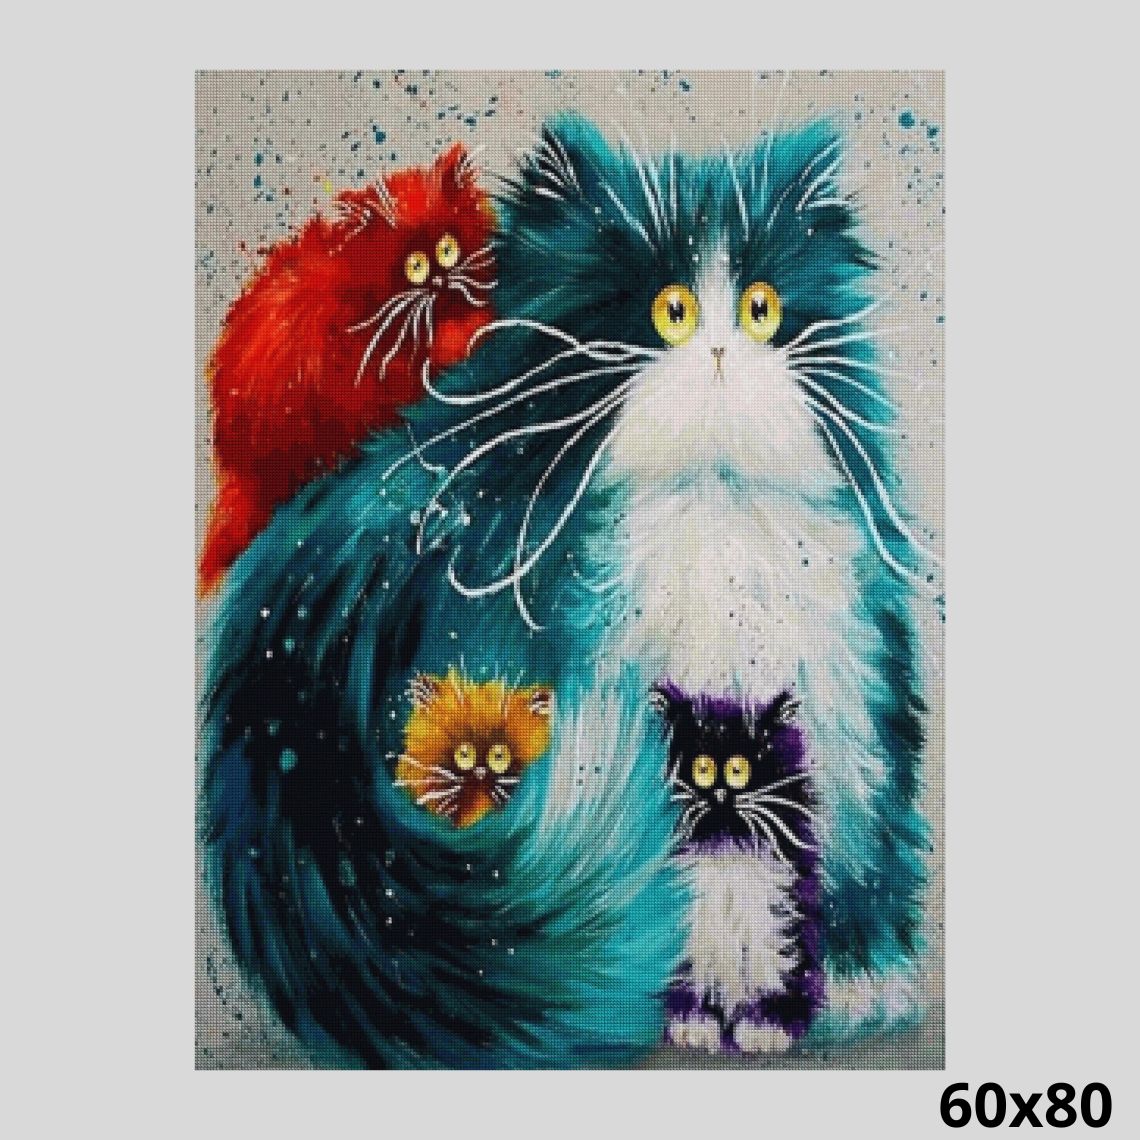 Furry Cats 60x80 - Paint with Diamonds